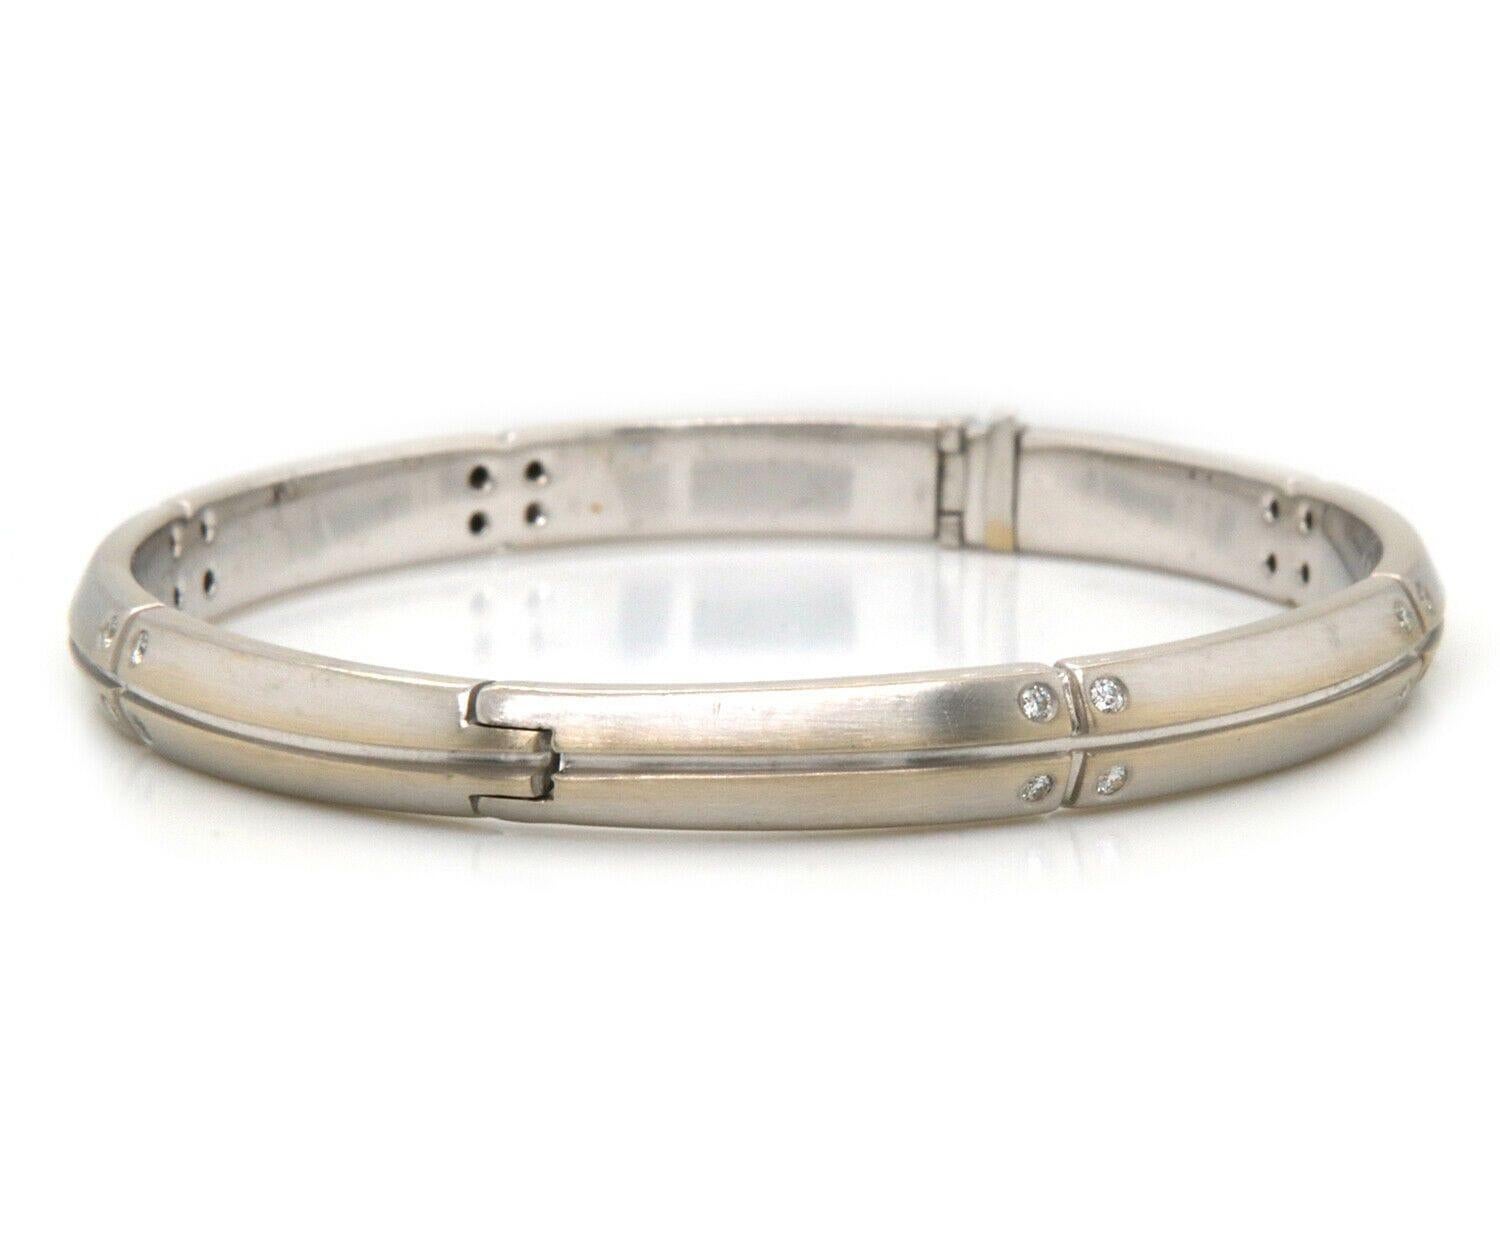 Tiffany & Co. Streamerica Diamond Bangle Bracelet in 18K

Tiffany & Co. Streamerica Diamond Bangle Bracelet
18K White Gold
Diamonds Carat Weight: Approx. 0.21ctw
Bracelet Width: Approx. 6.0 MM
Bracelet Length: Approx. 6.50 Inches
Weight: Approx.